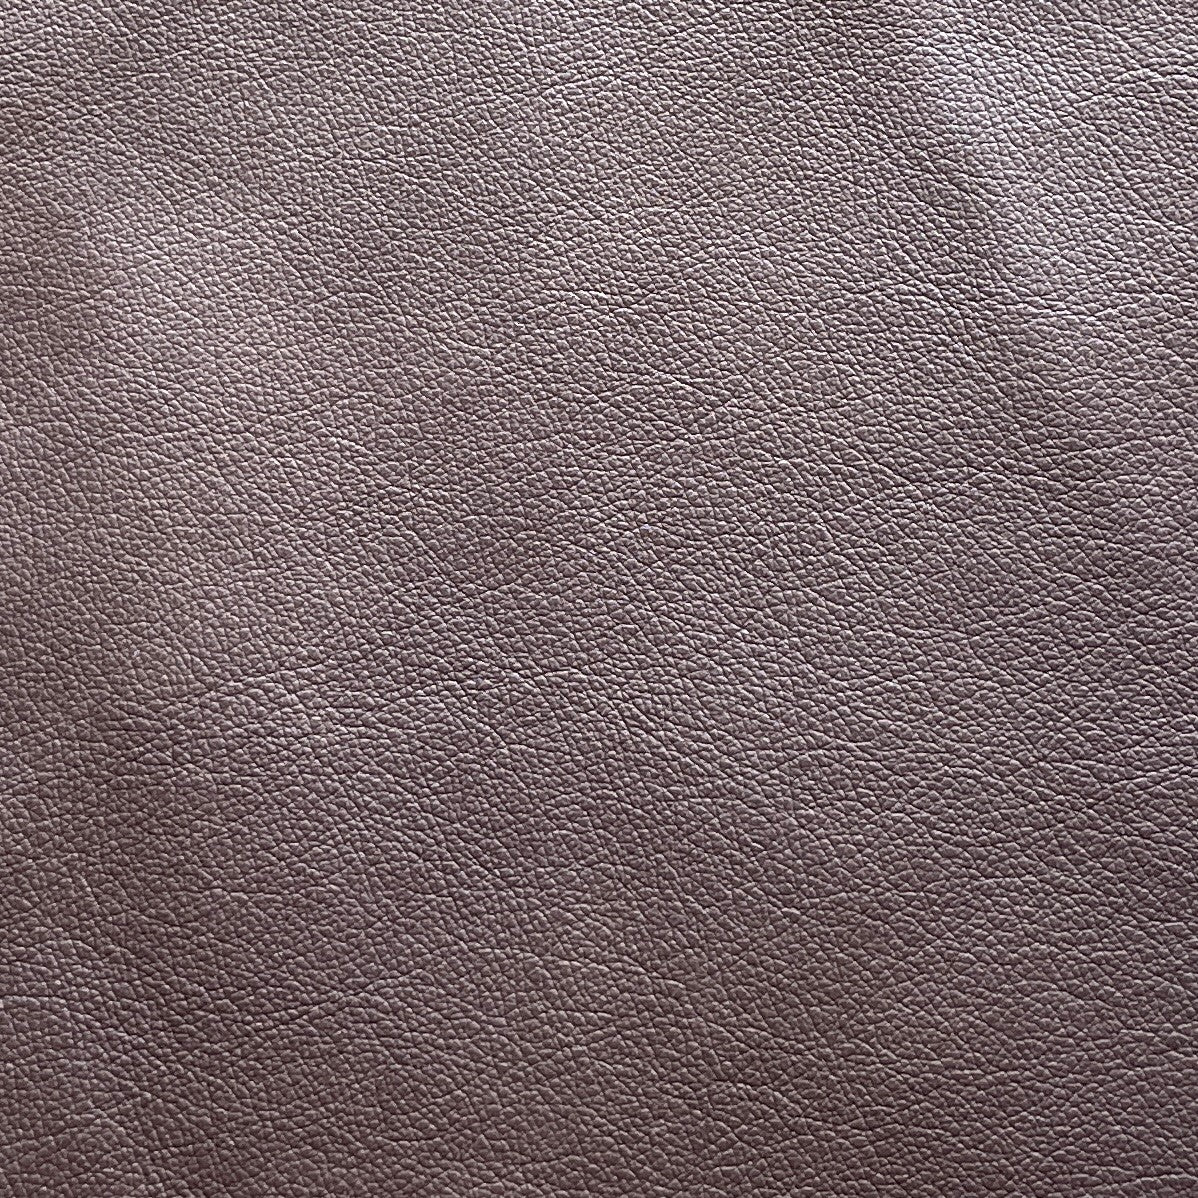 Upholstery Cow Hide #13 | 1.0mm | 5.19 sq.m | From $385 ea.